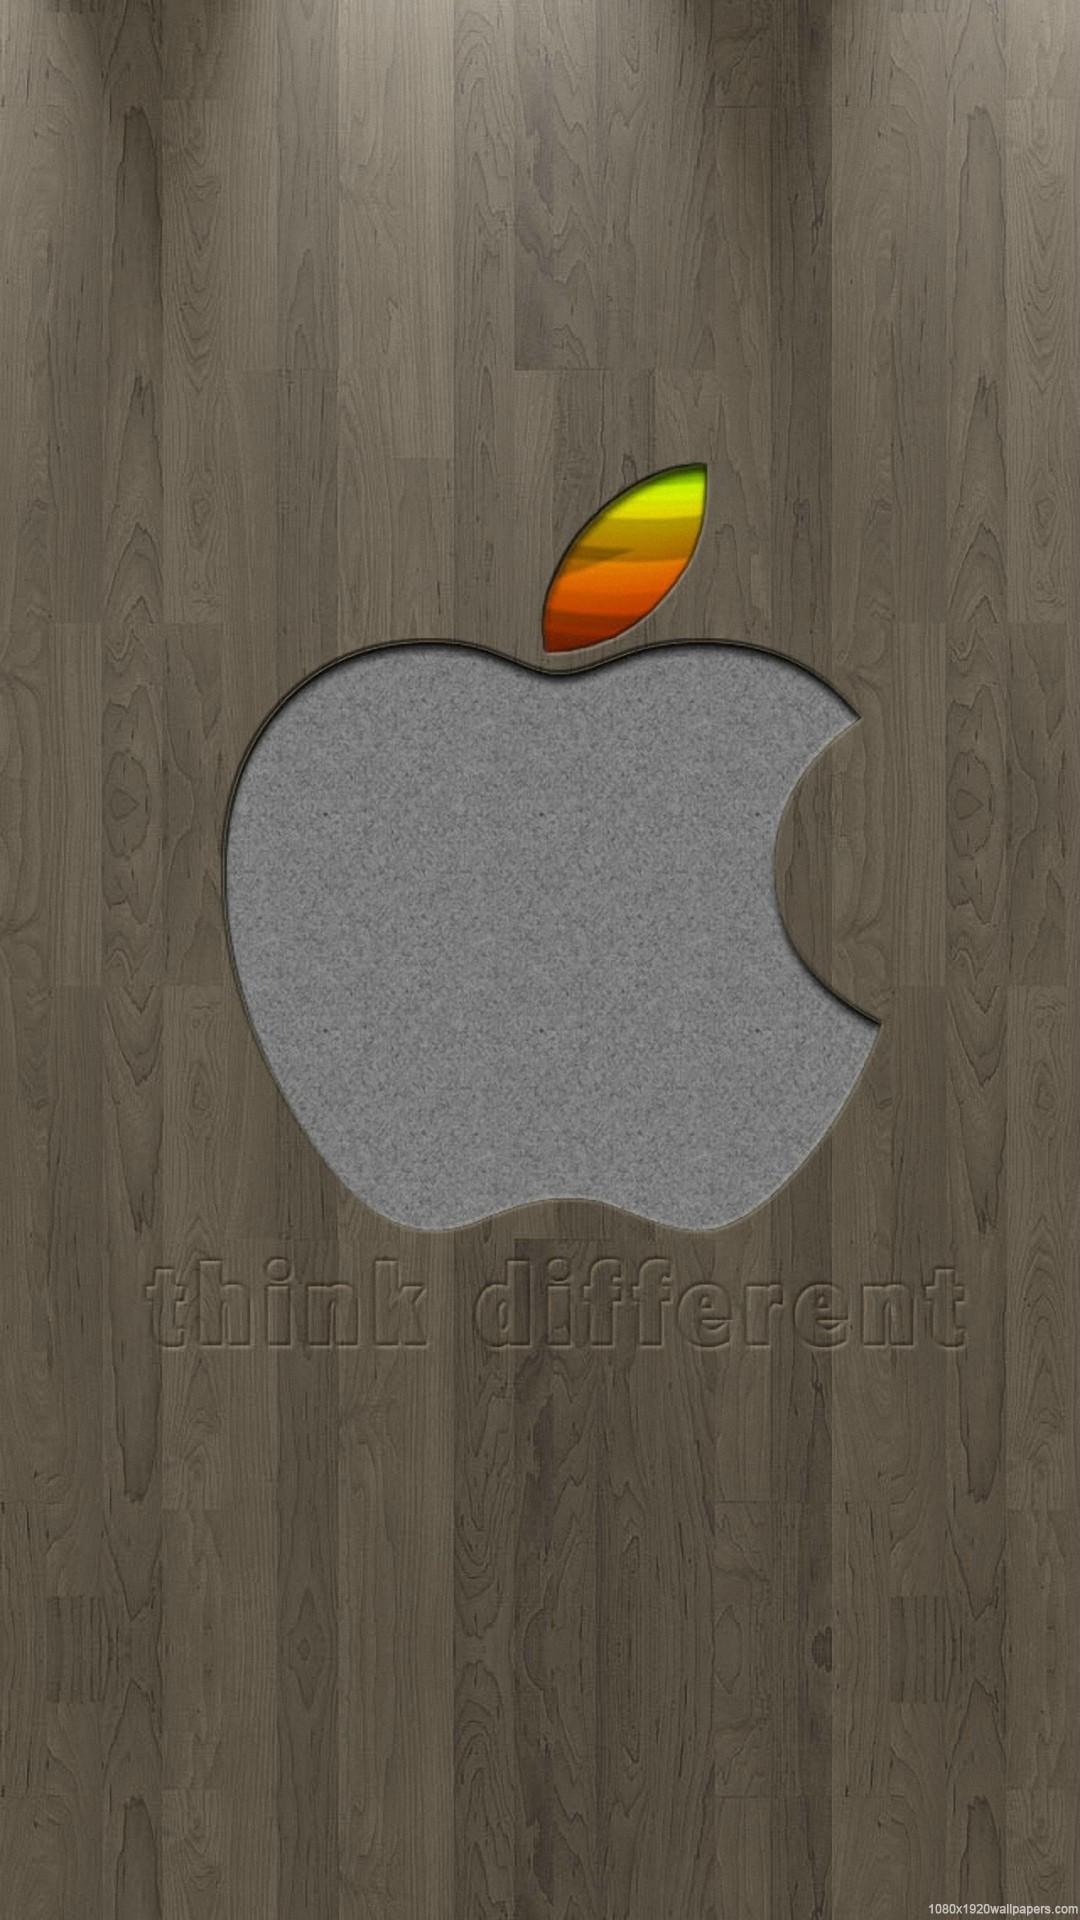 Hd Apple Logo Wallpaper For iPhone Cool Background